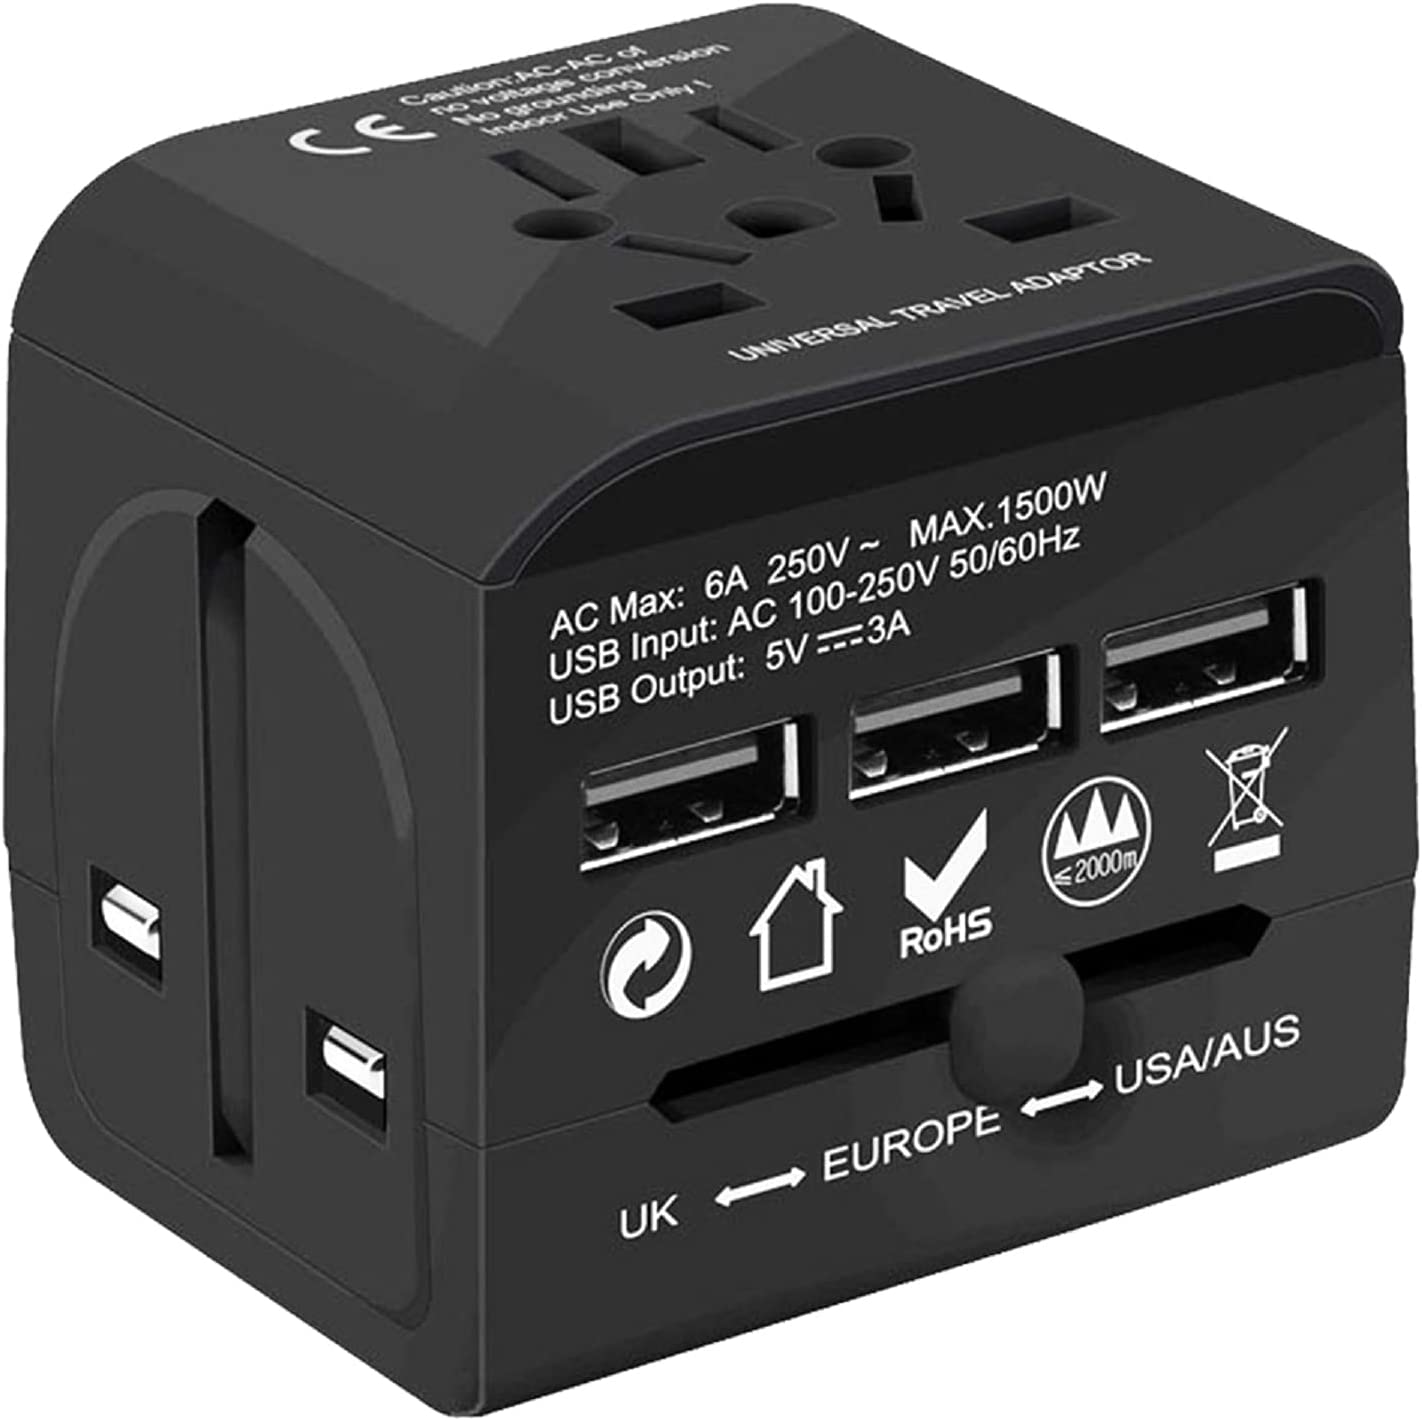 Charger Universal Adapter Multi Outlet Port 3 USB Phone Power All in One Multi Cable Multiple Phone Charge Wall Plug (Black)  UTA 3USB BLK